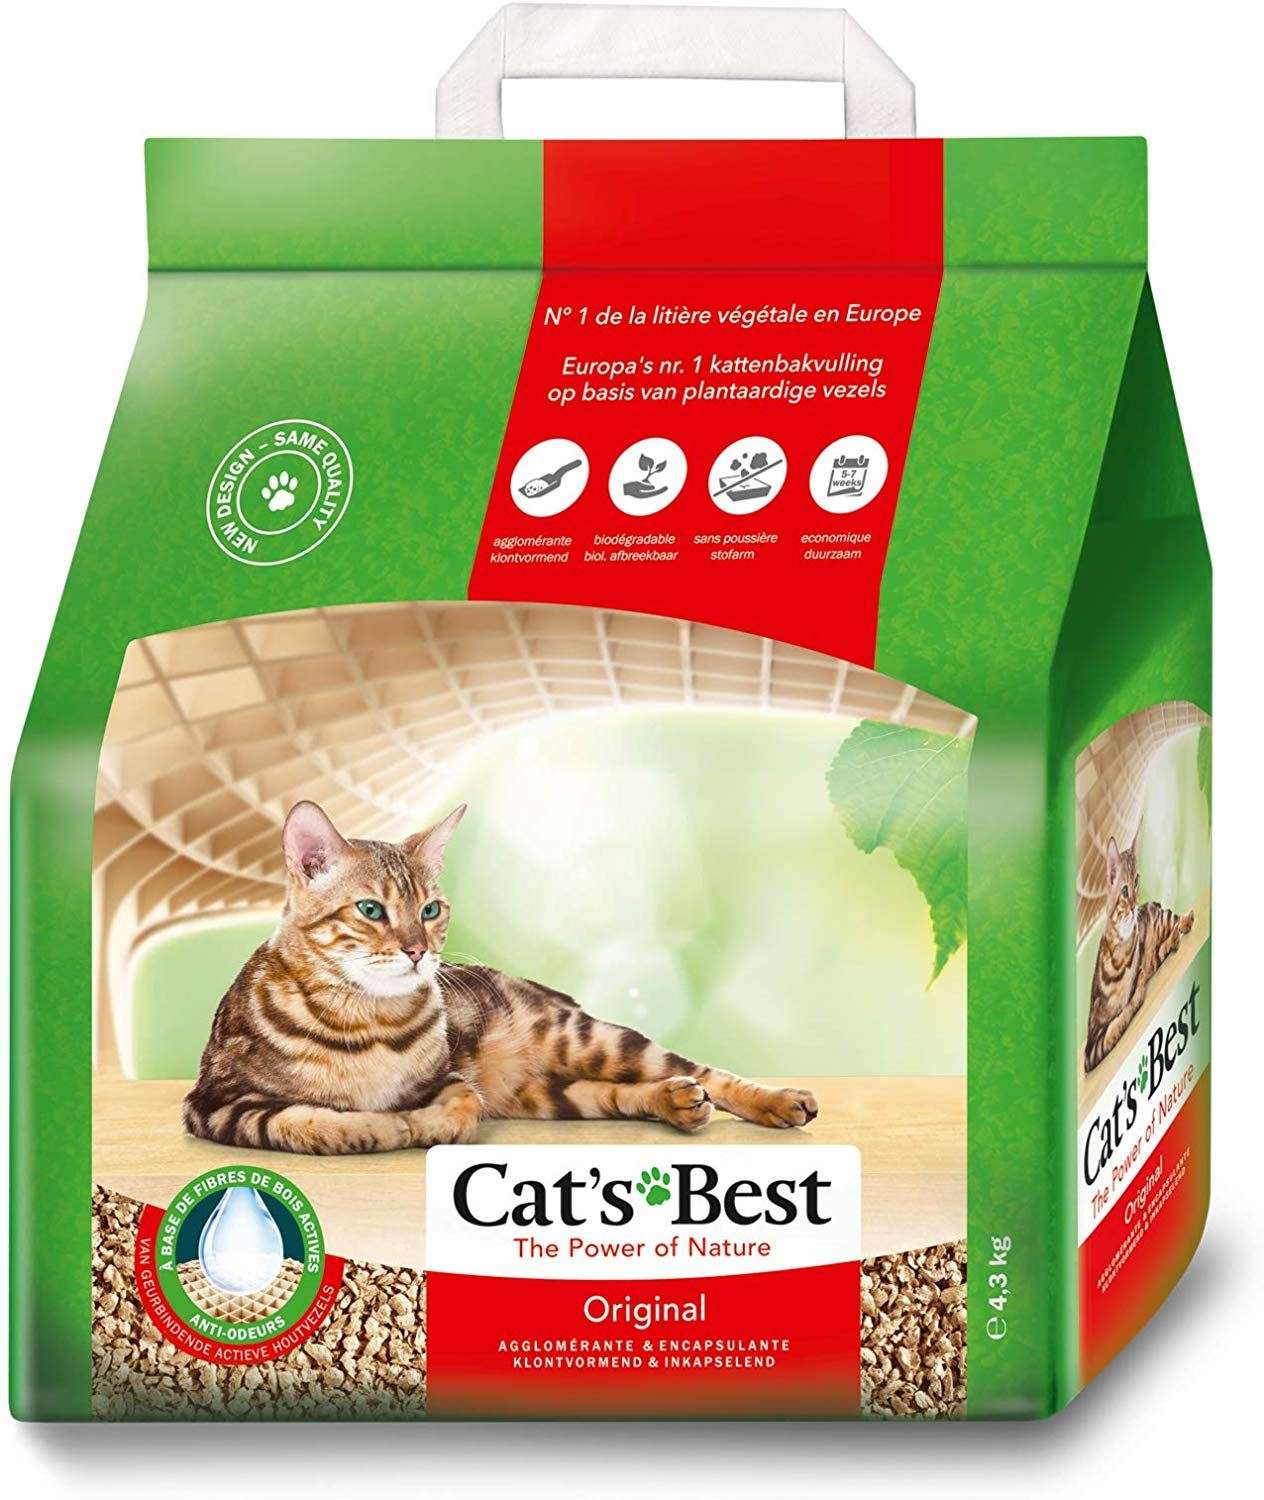 Cats Best Oko Plus Wood Fibres Based Clumping Cat Litter ...